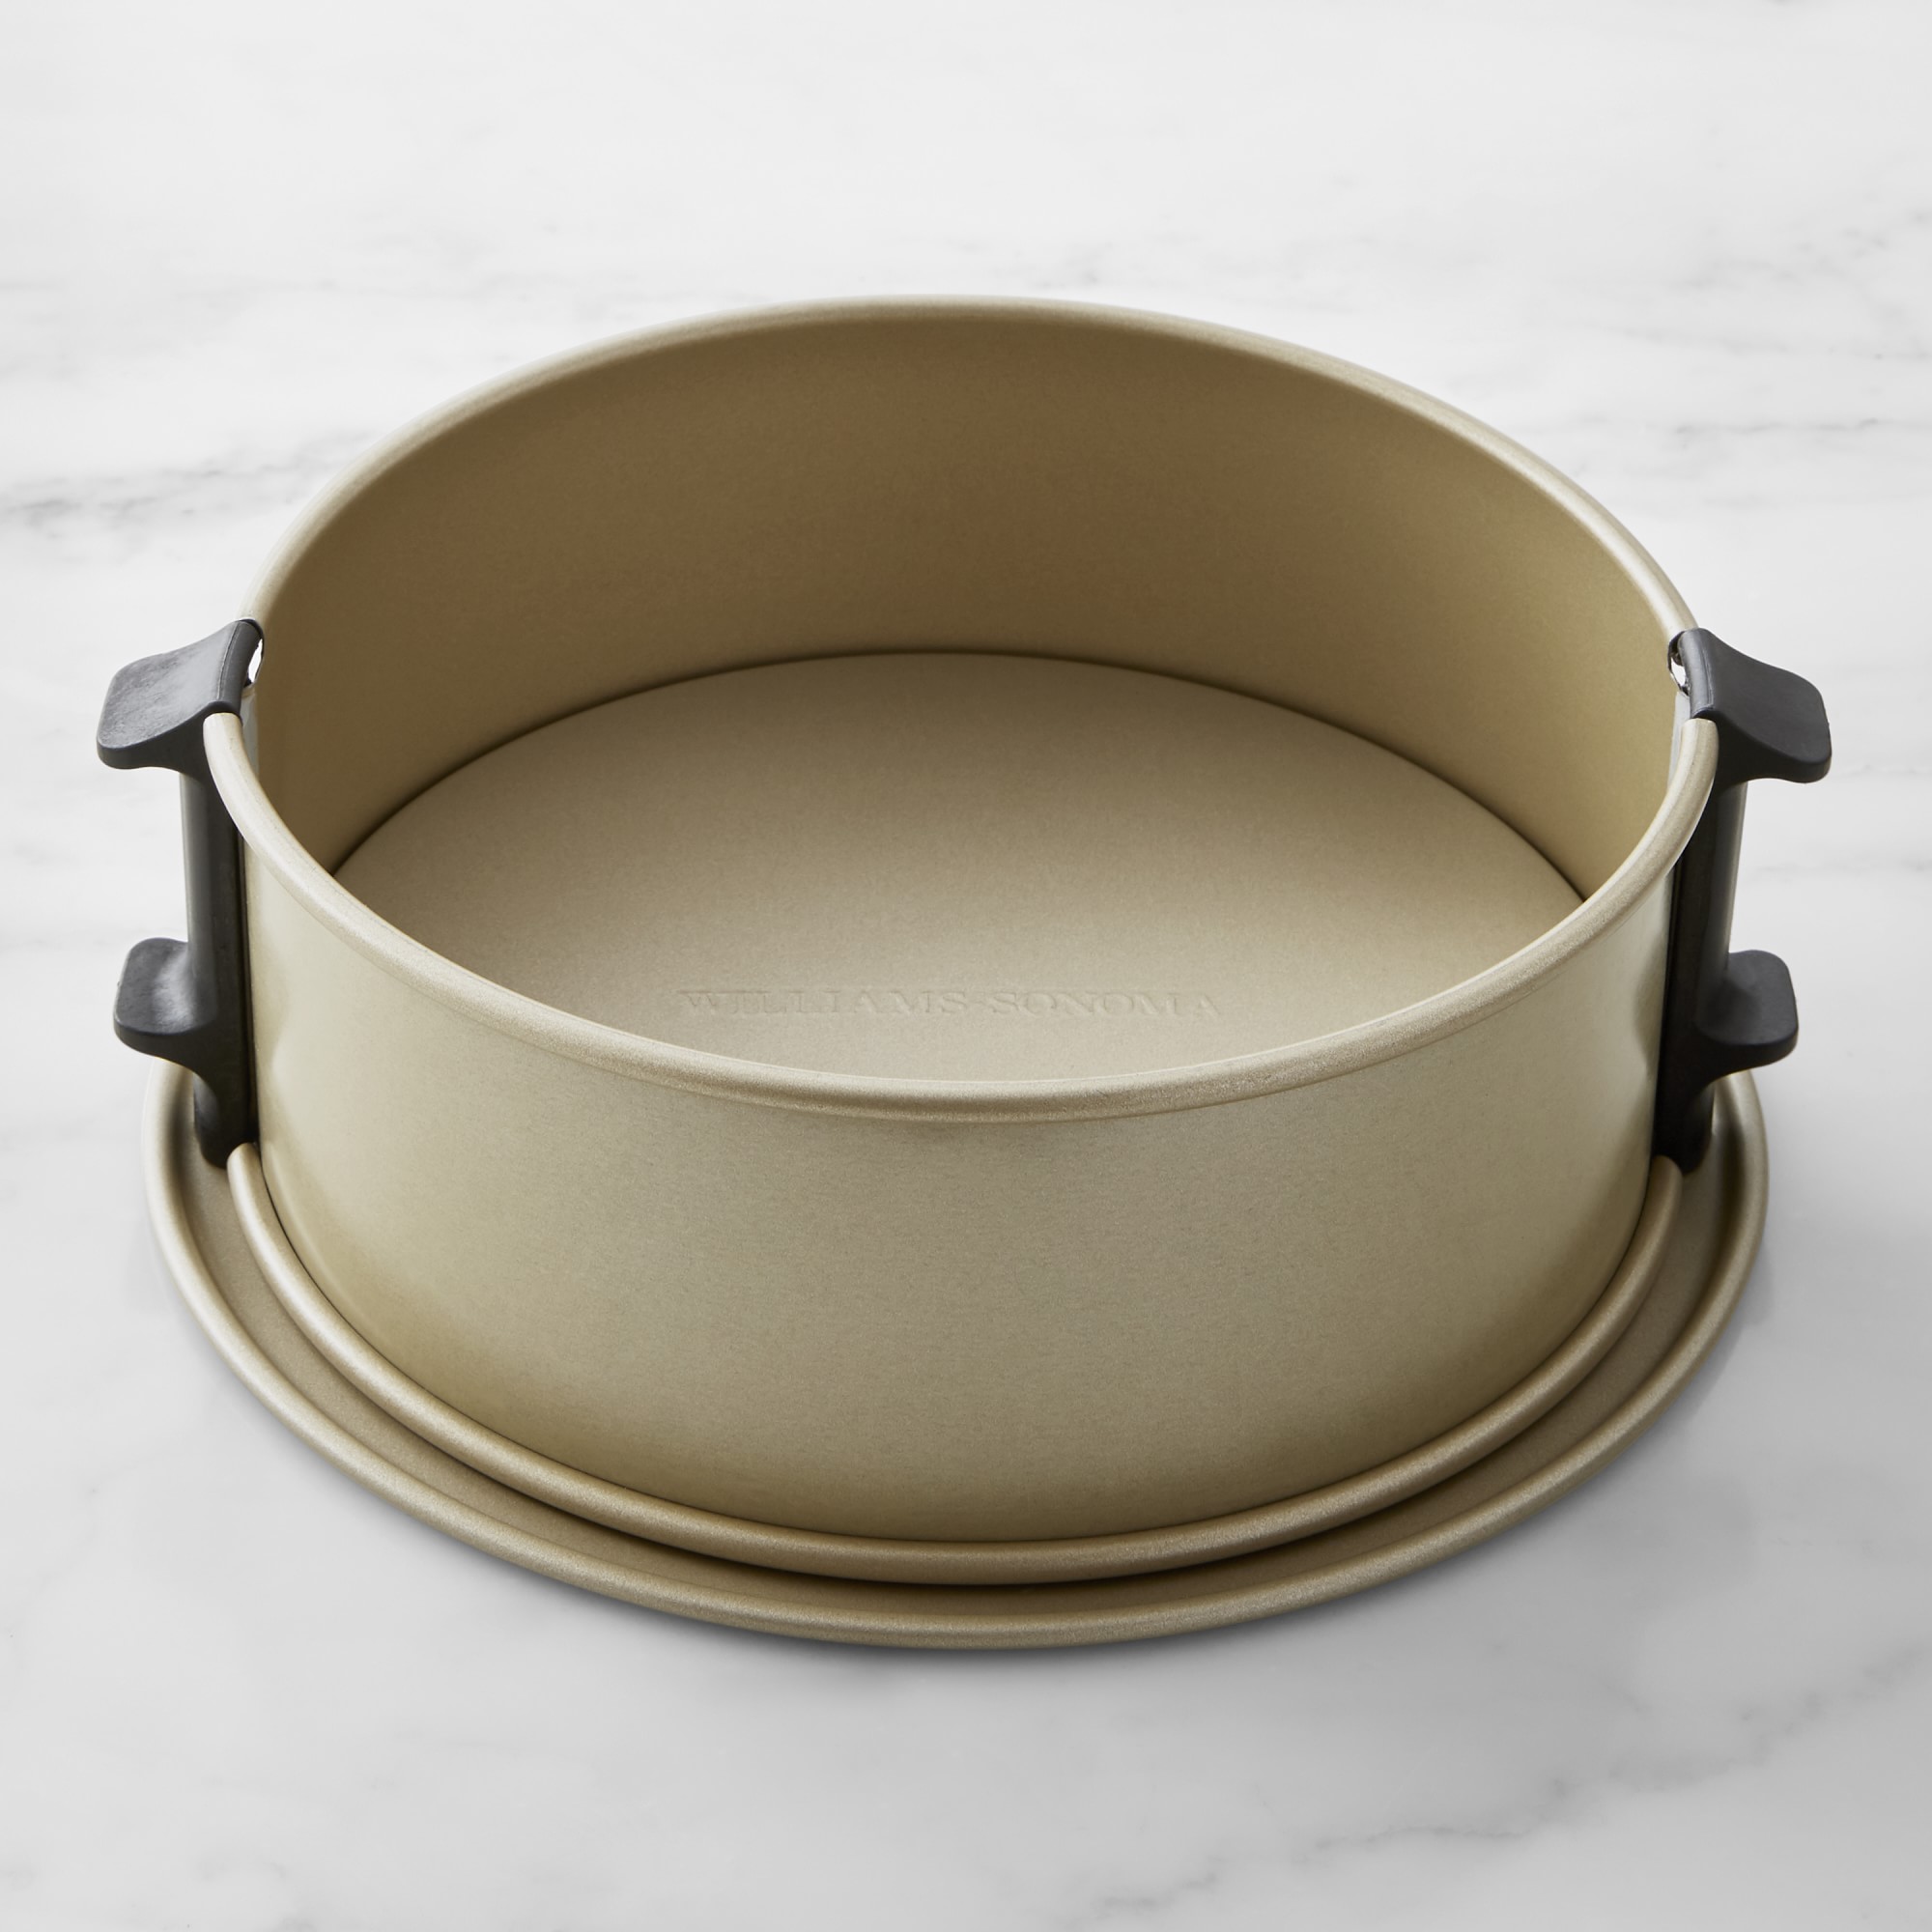 Williams Sonoma Goldtouch® Pro Nonstick Leakproof Springform Cake Pan, 10"